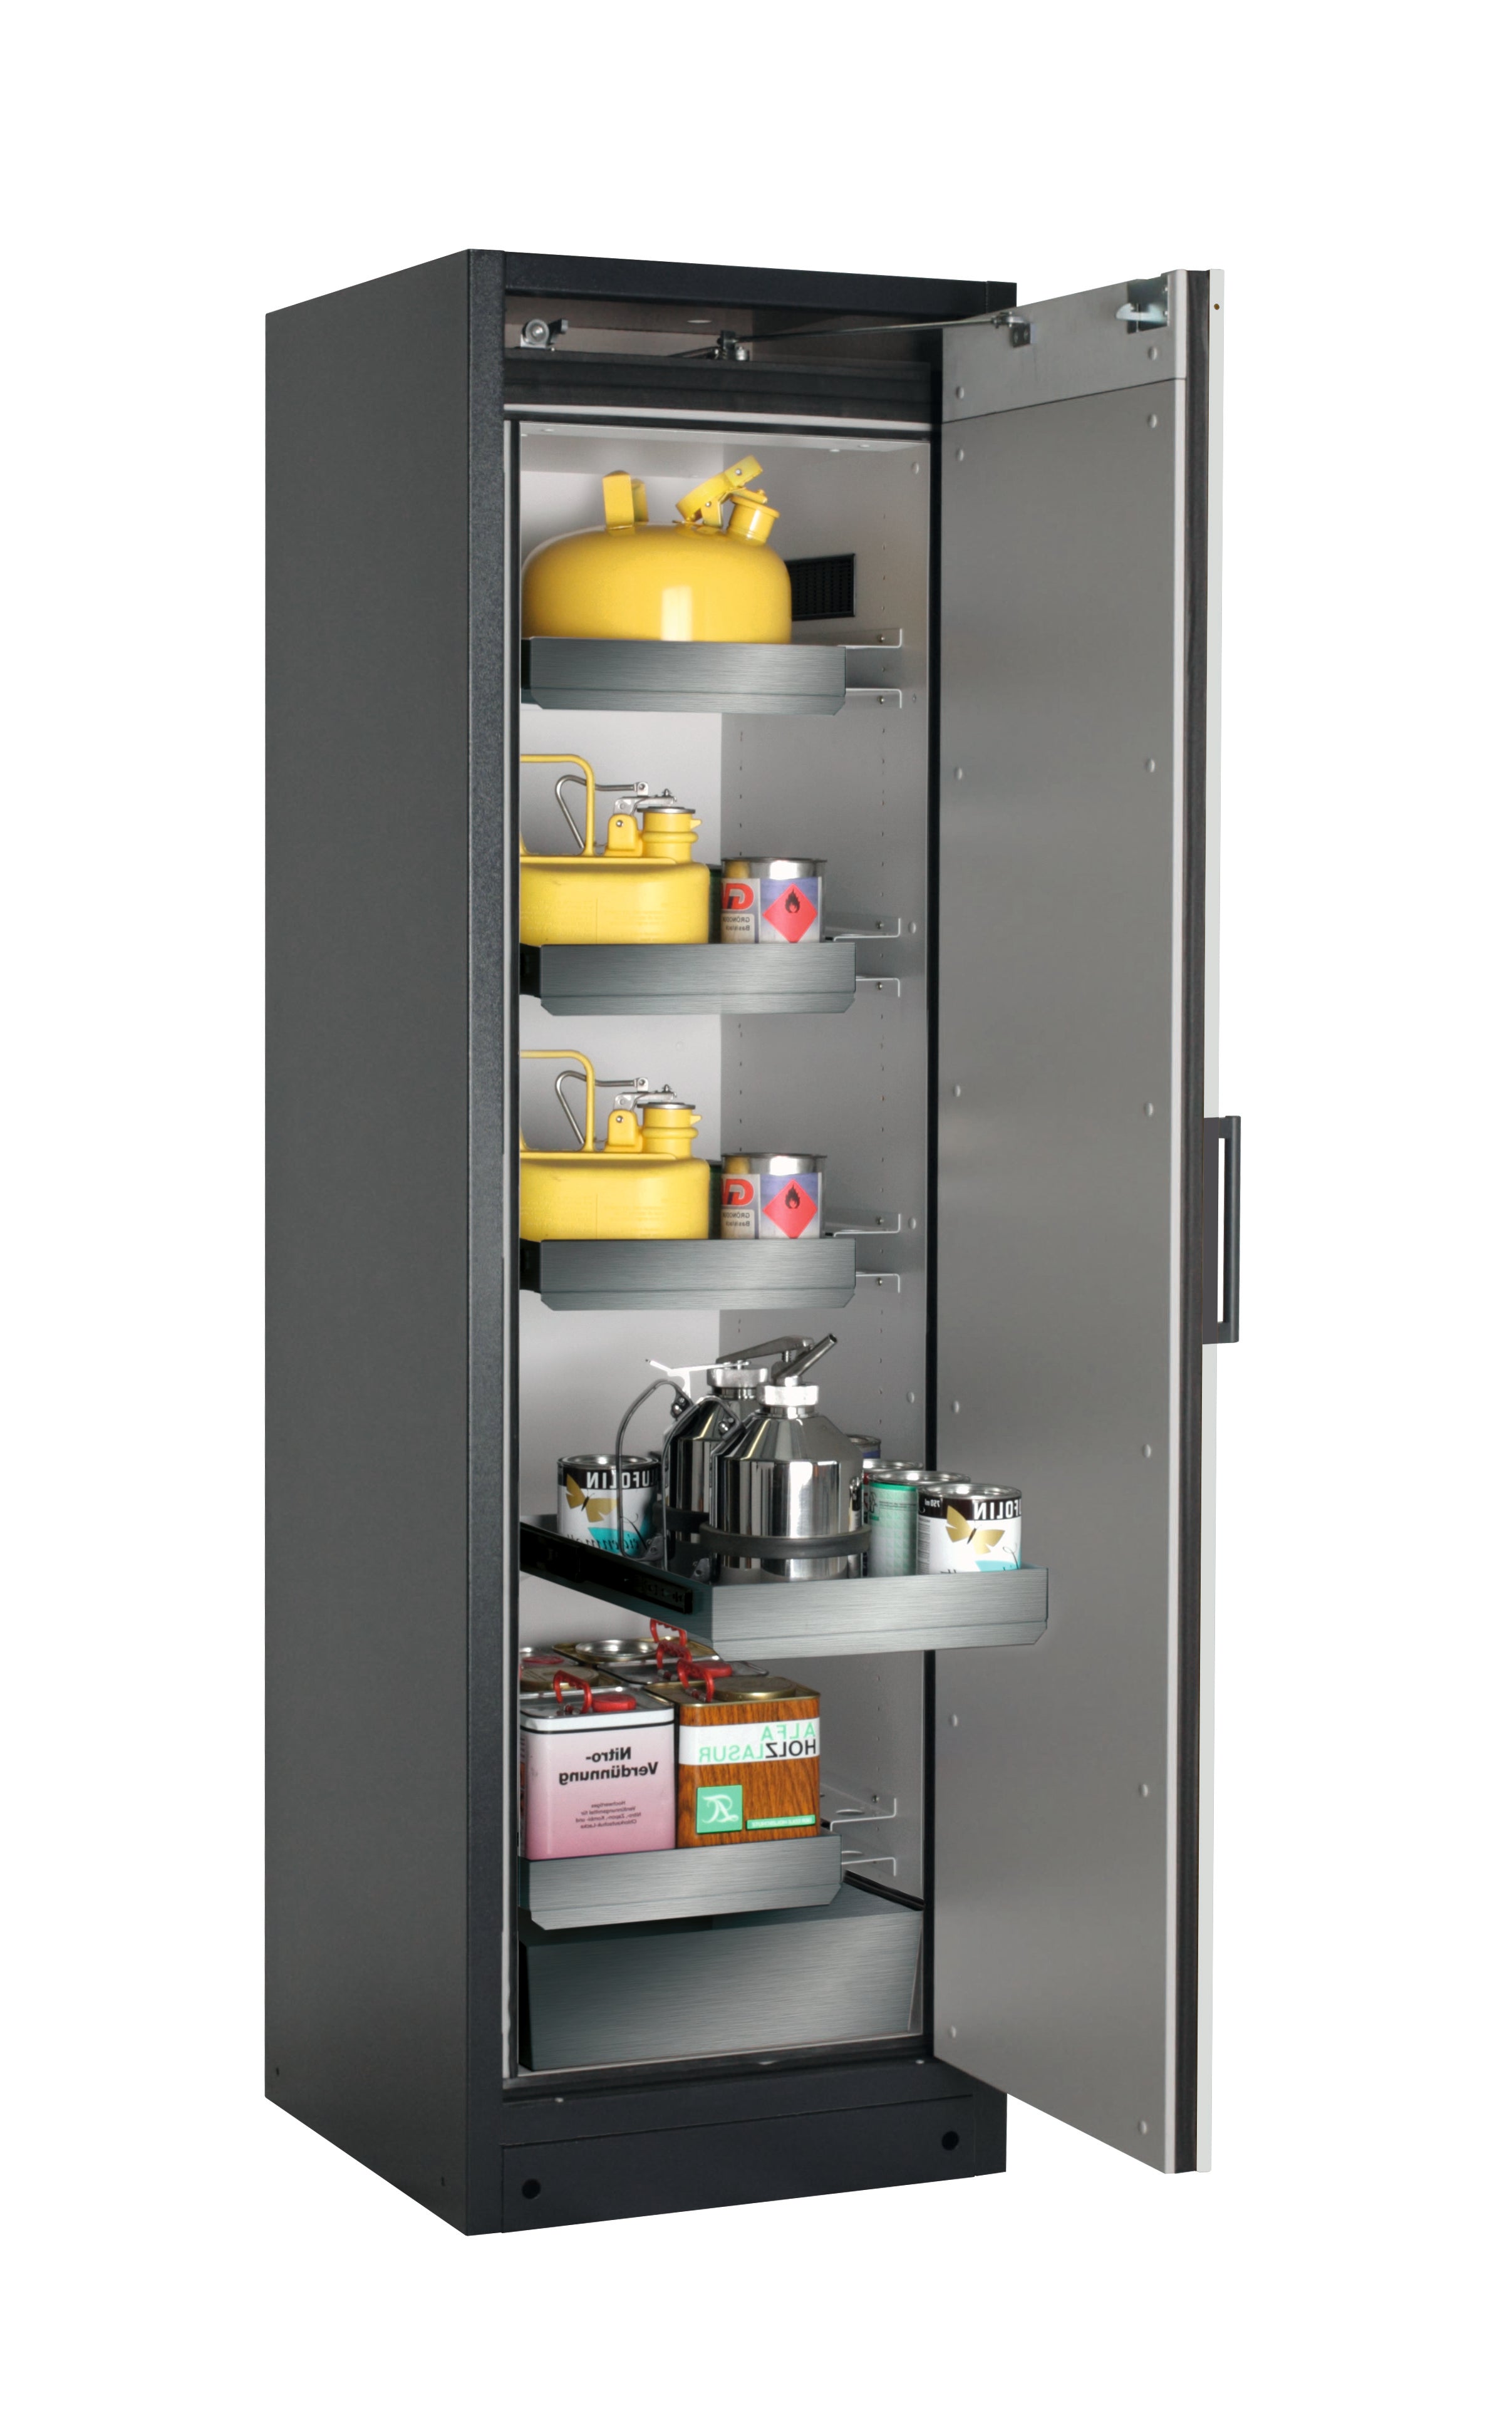 Type 90 safety storage cabinet Q-CLASSIC-90 model Q90.195.060.R in light grey RAL 7035 with 4x drawer (standard) (stainless steel 1.4301),